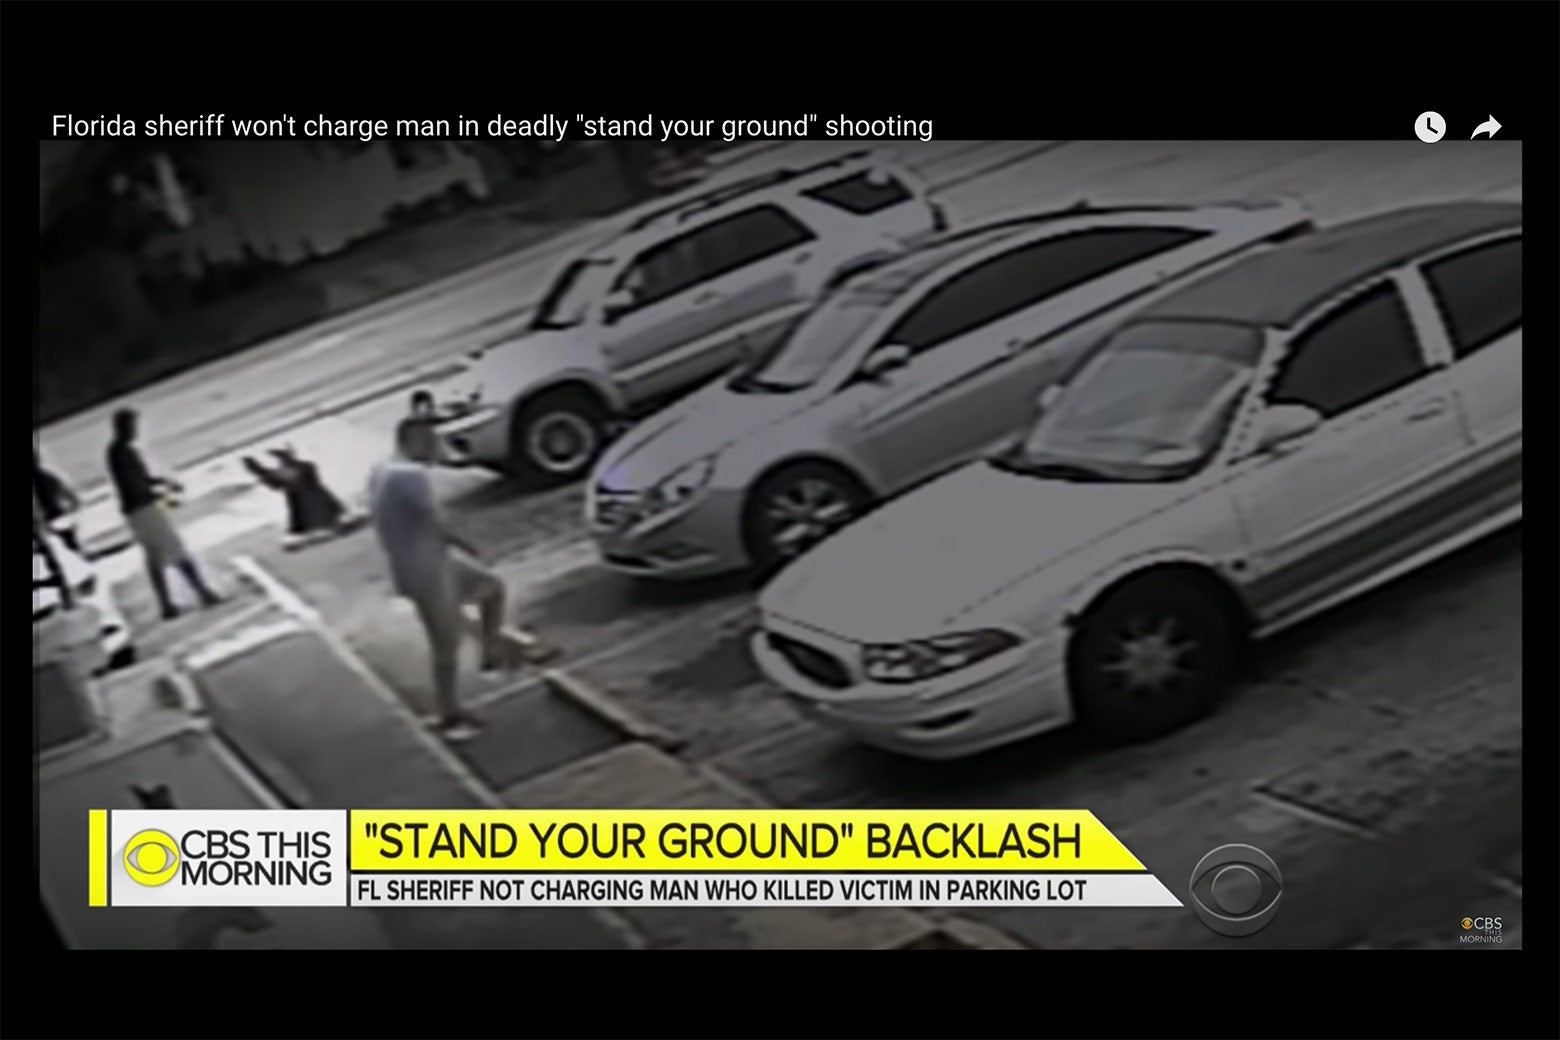 Footage of McGlocktin's shooting, as aired on CBS This Morning.